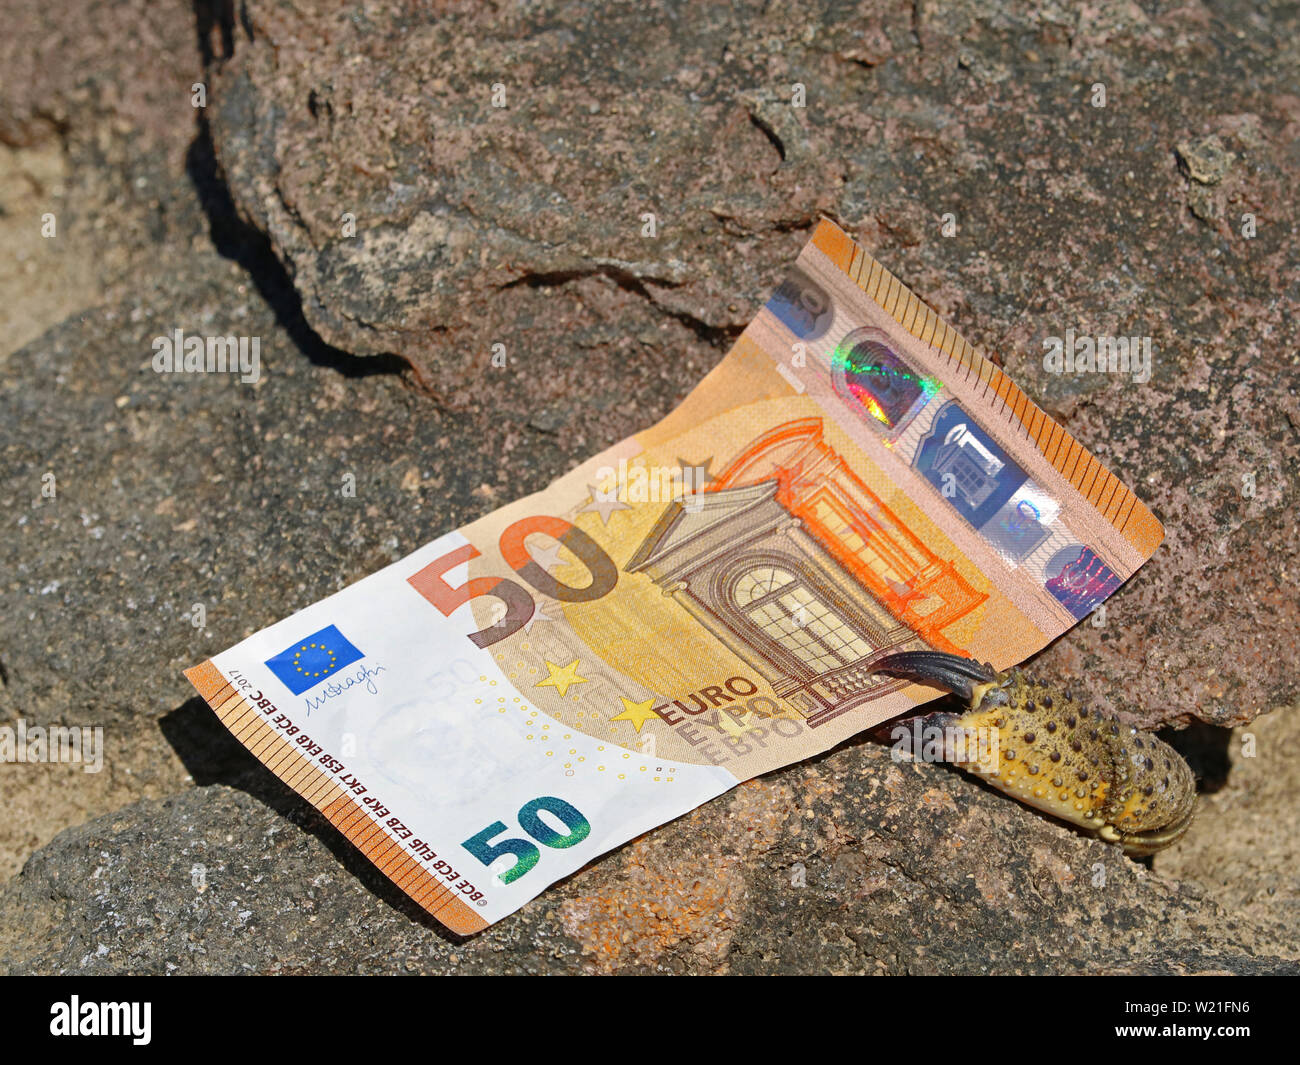 crab on coast try to grab fifty euro banknote, concept of theft on vacation Stock Photo